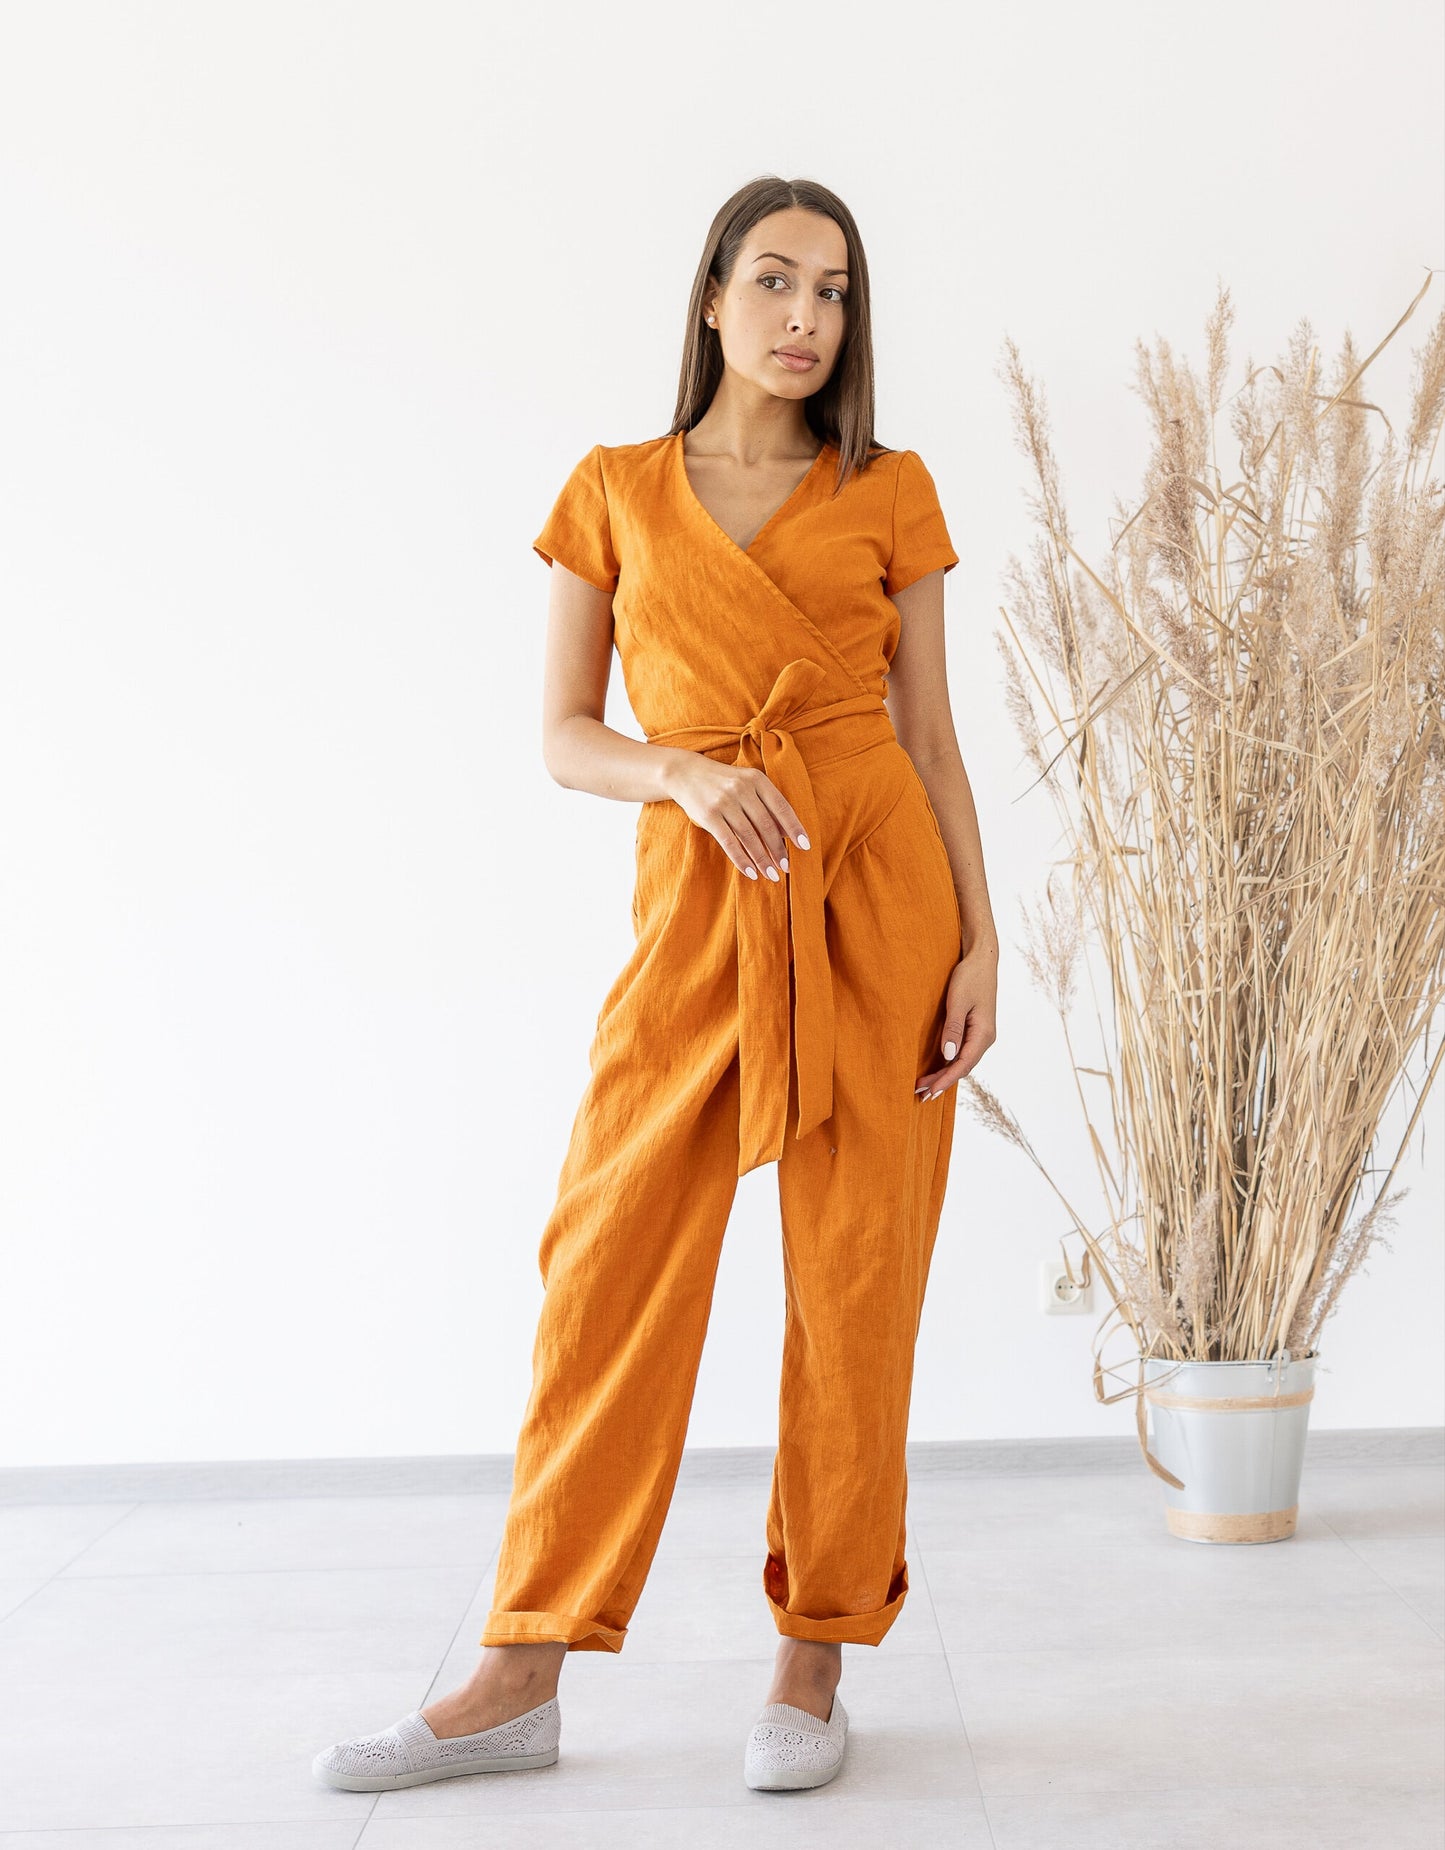 Elevate Your Style With Handmade Linen Jumpsuits